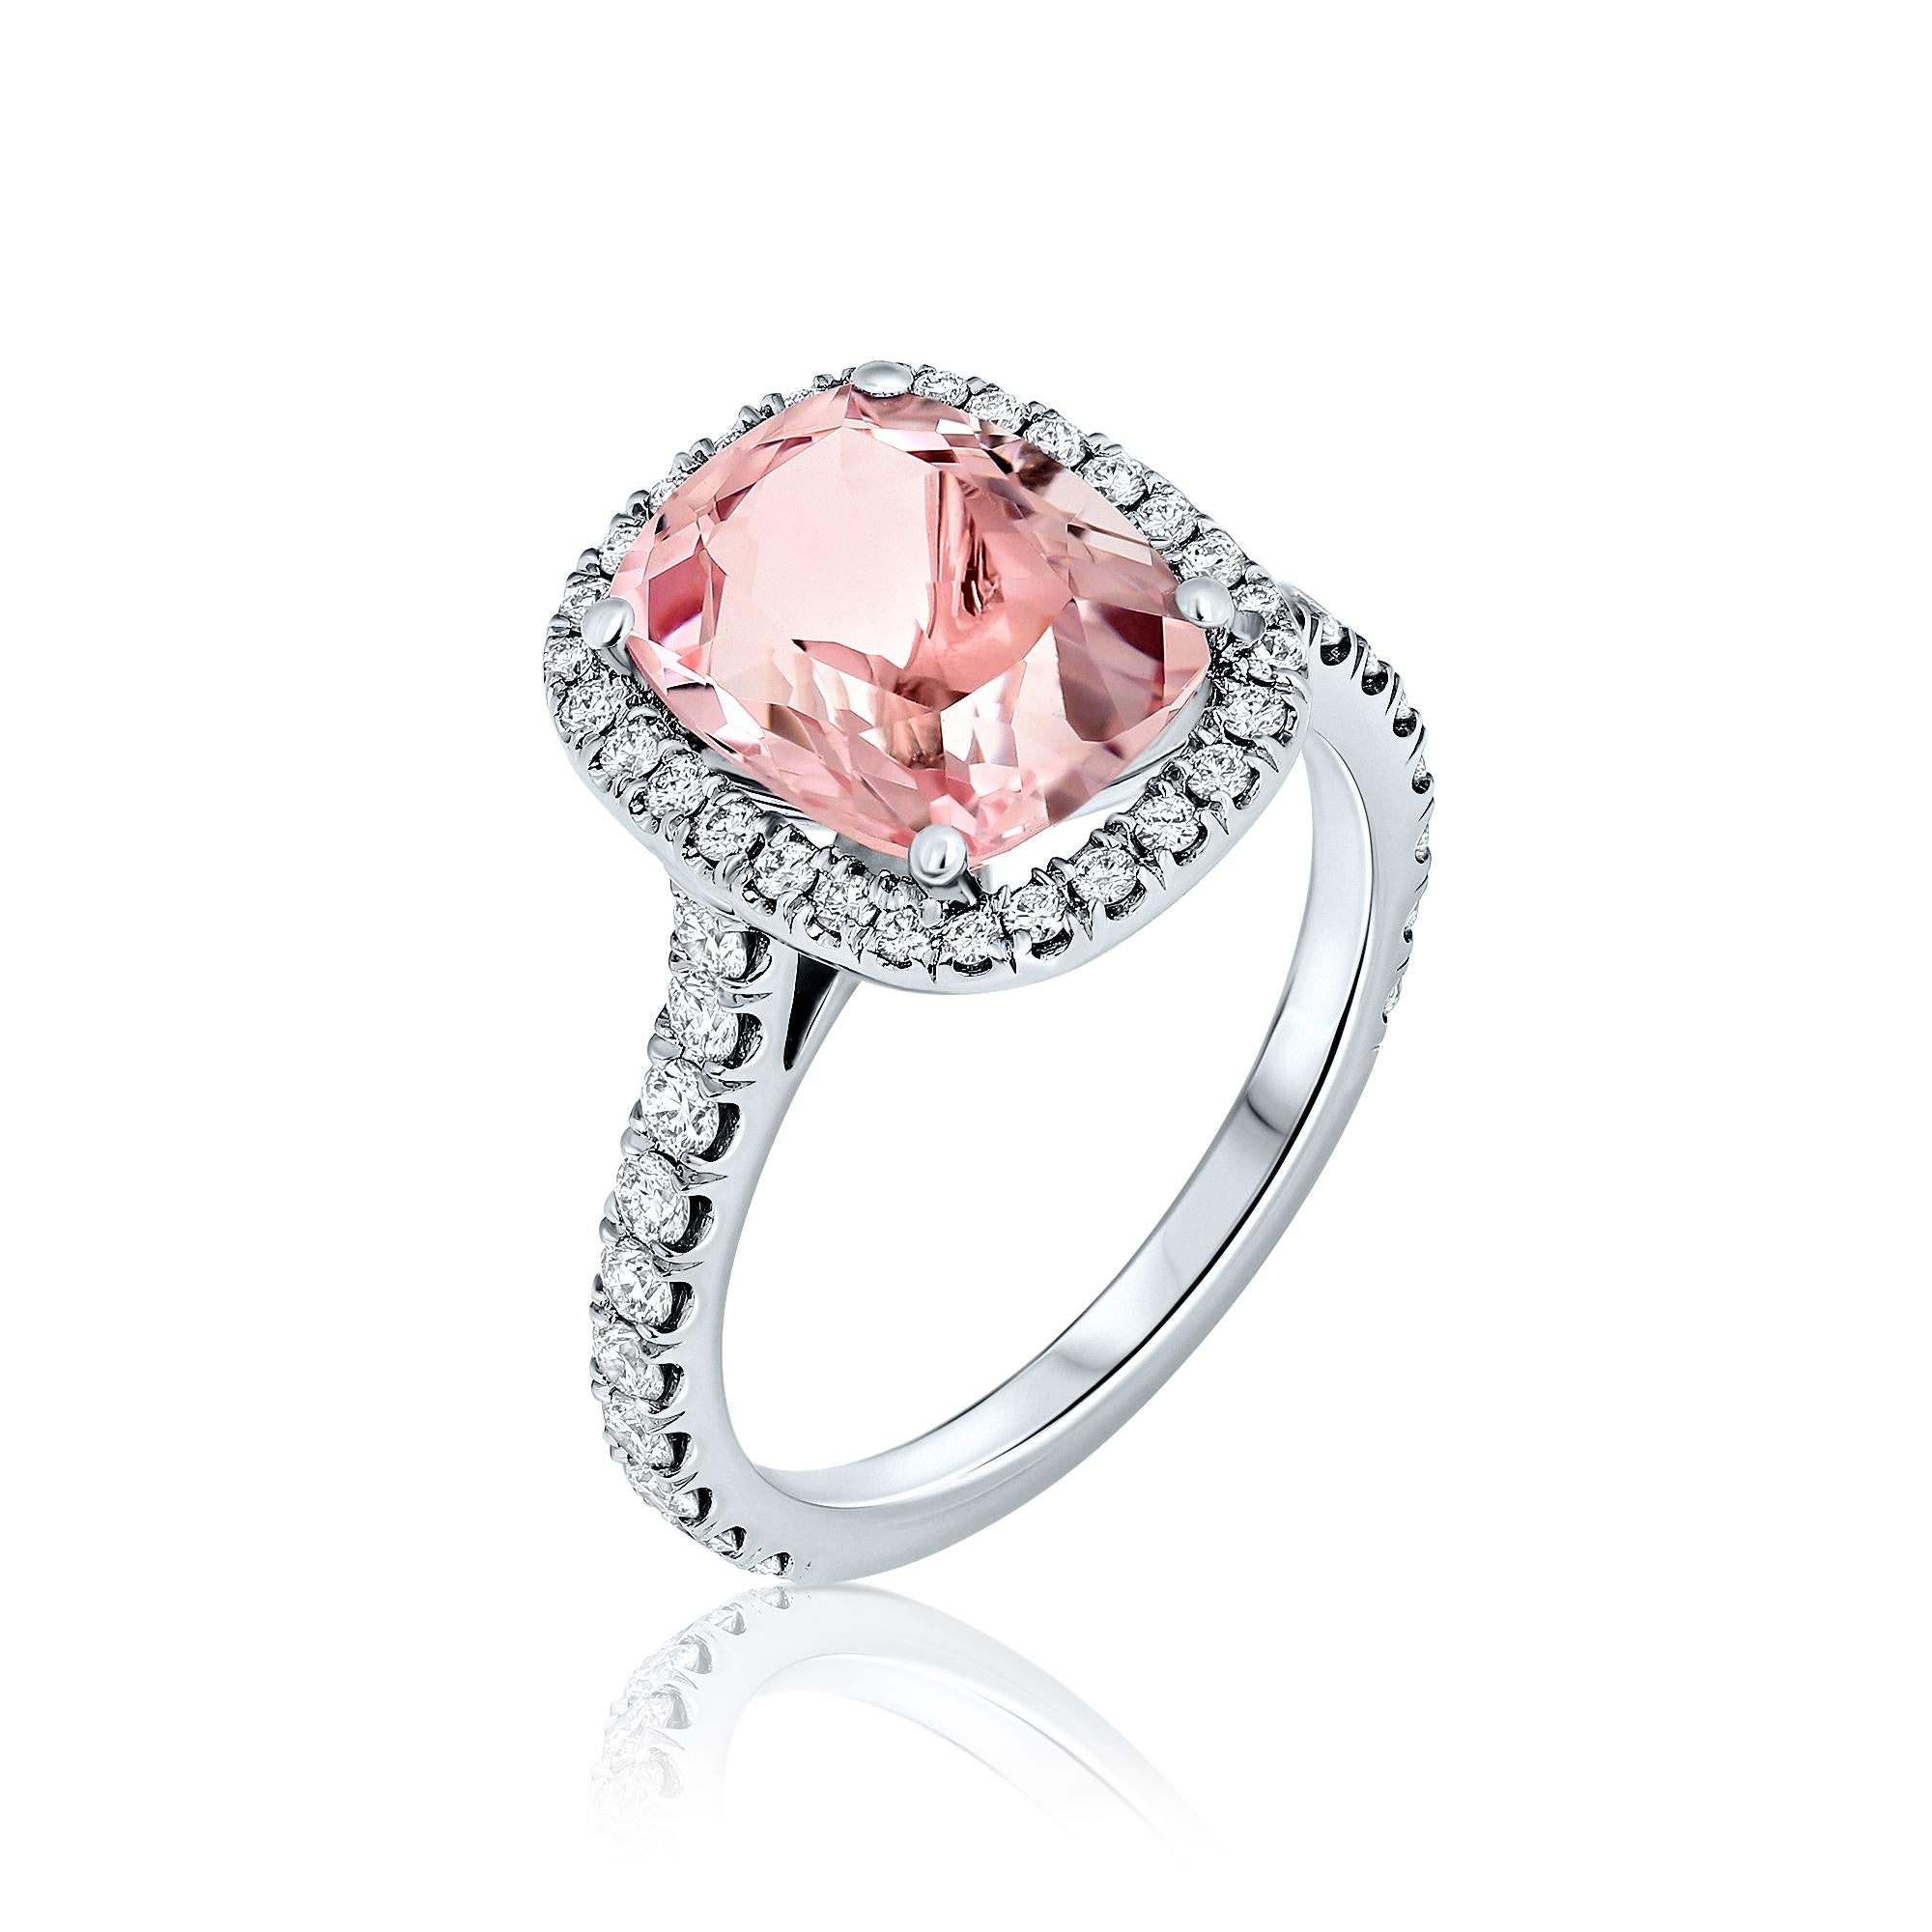 Contemporary 3.98 Carat Cushion-cut Morganite & Diamond, Halo Cocktail Ring 18k White Gold. For Sale